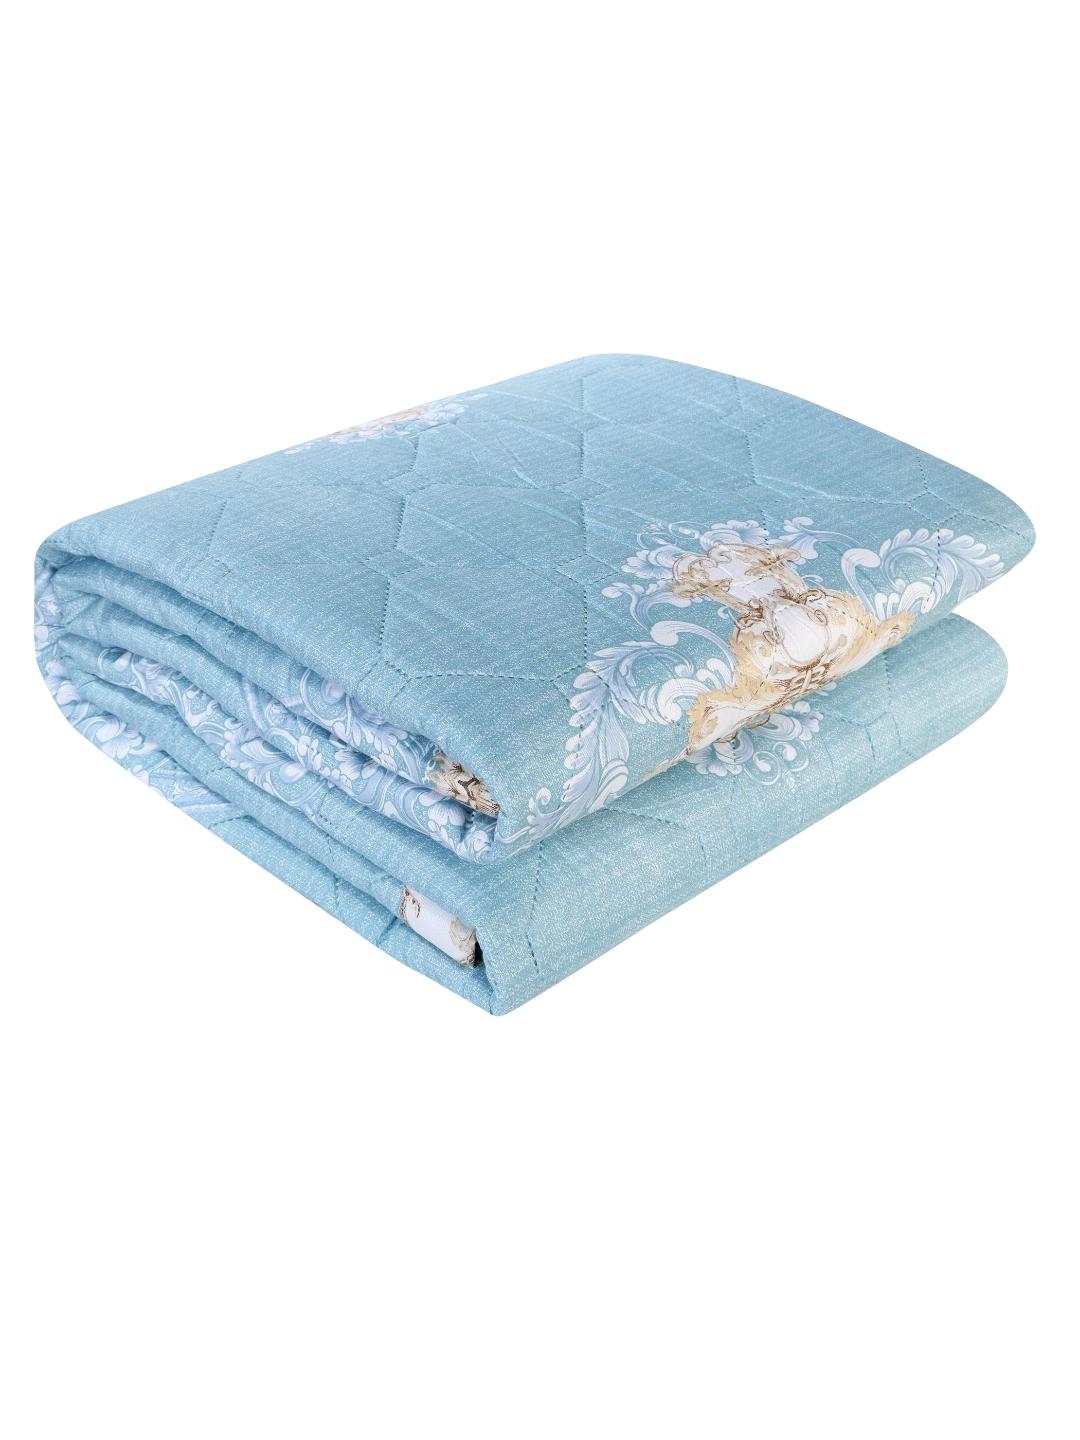 Floral Print Double Bed Light Weight Comforter- Sea Blue